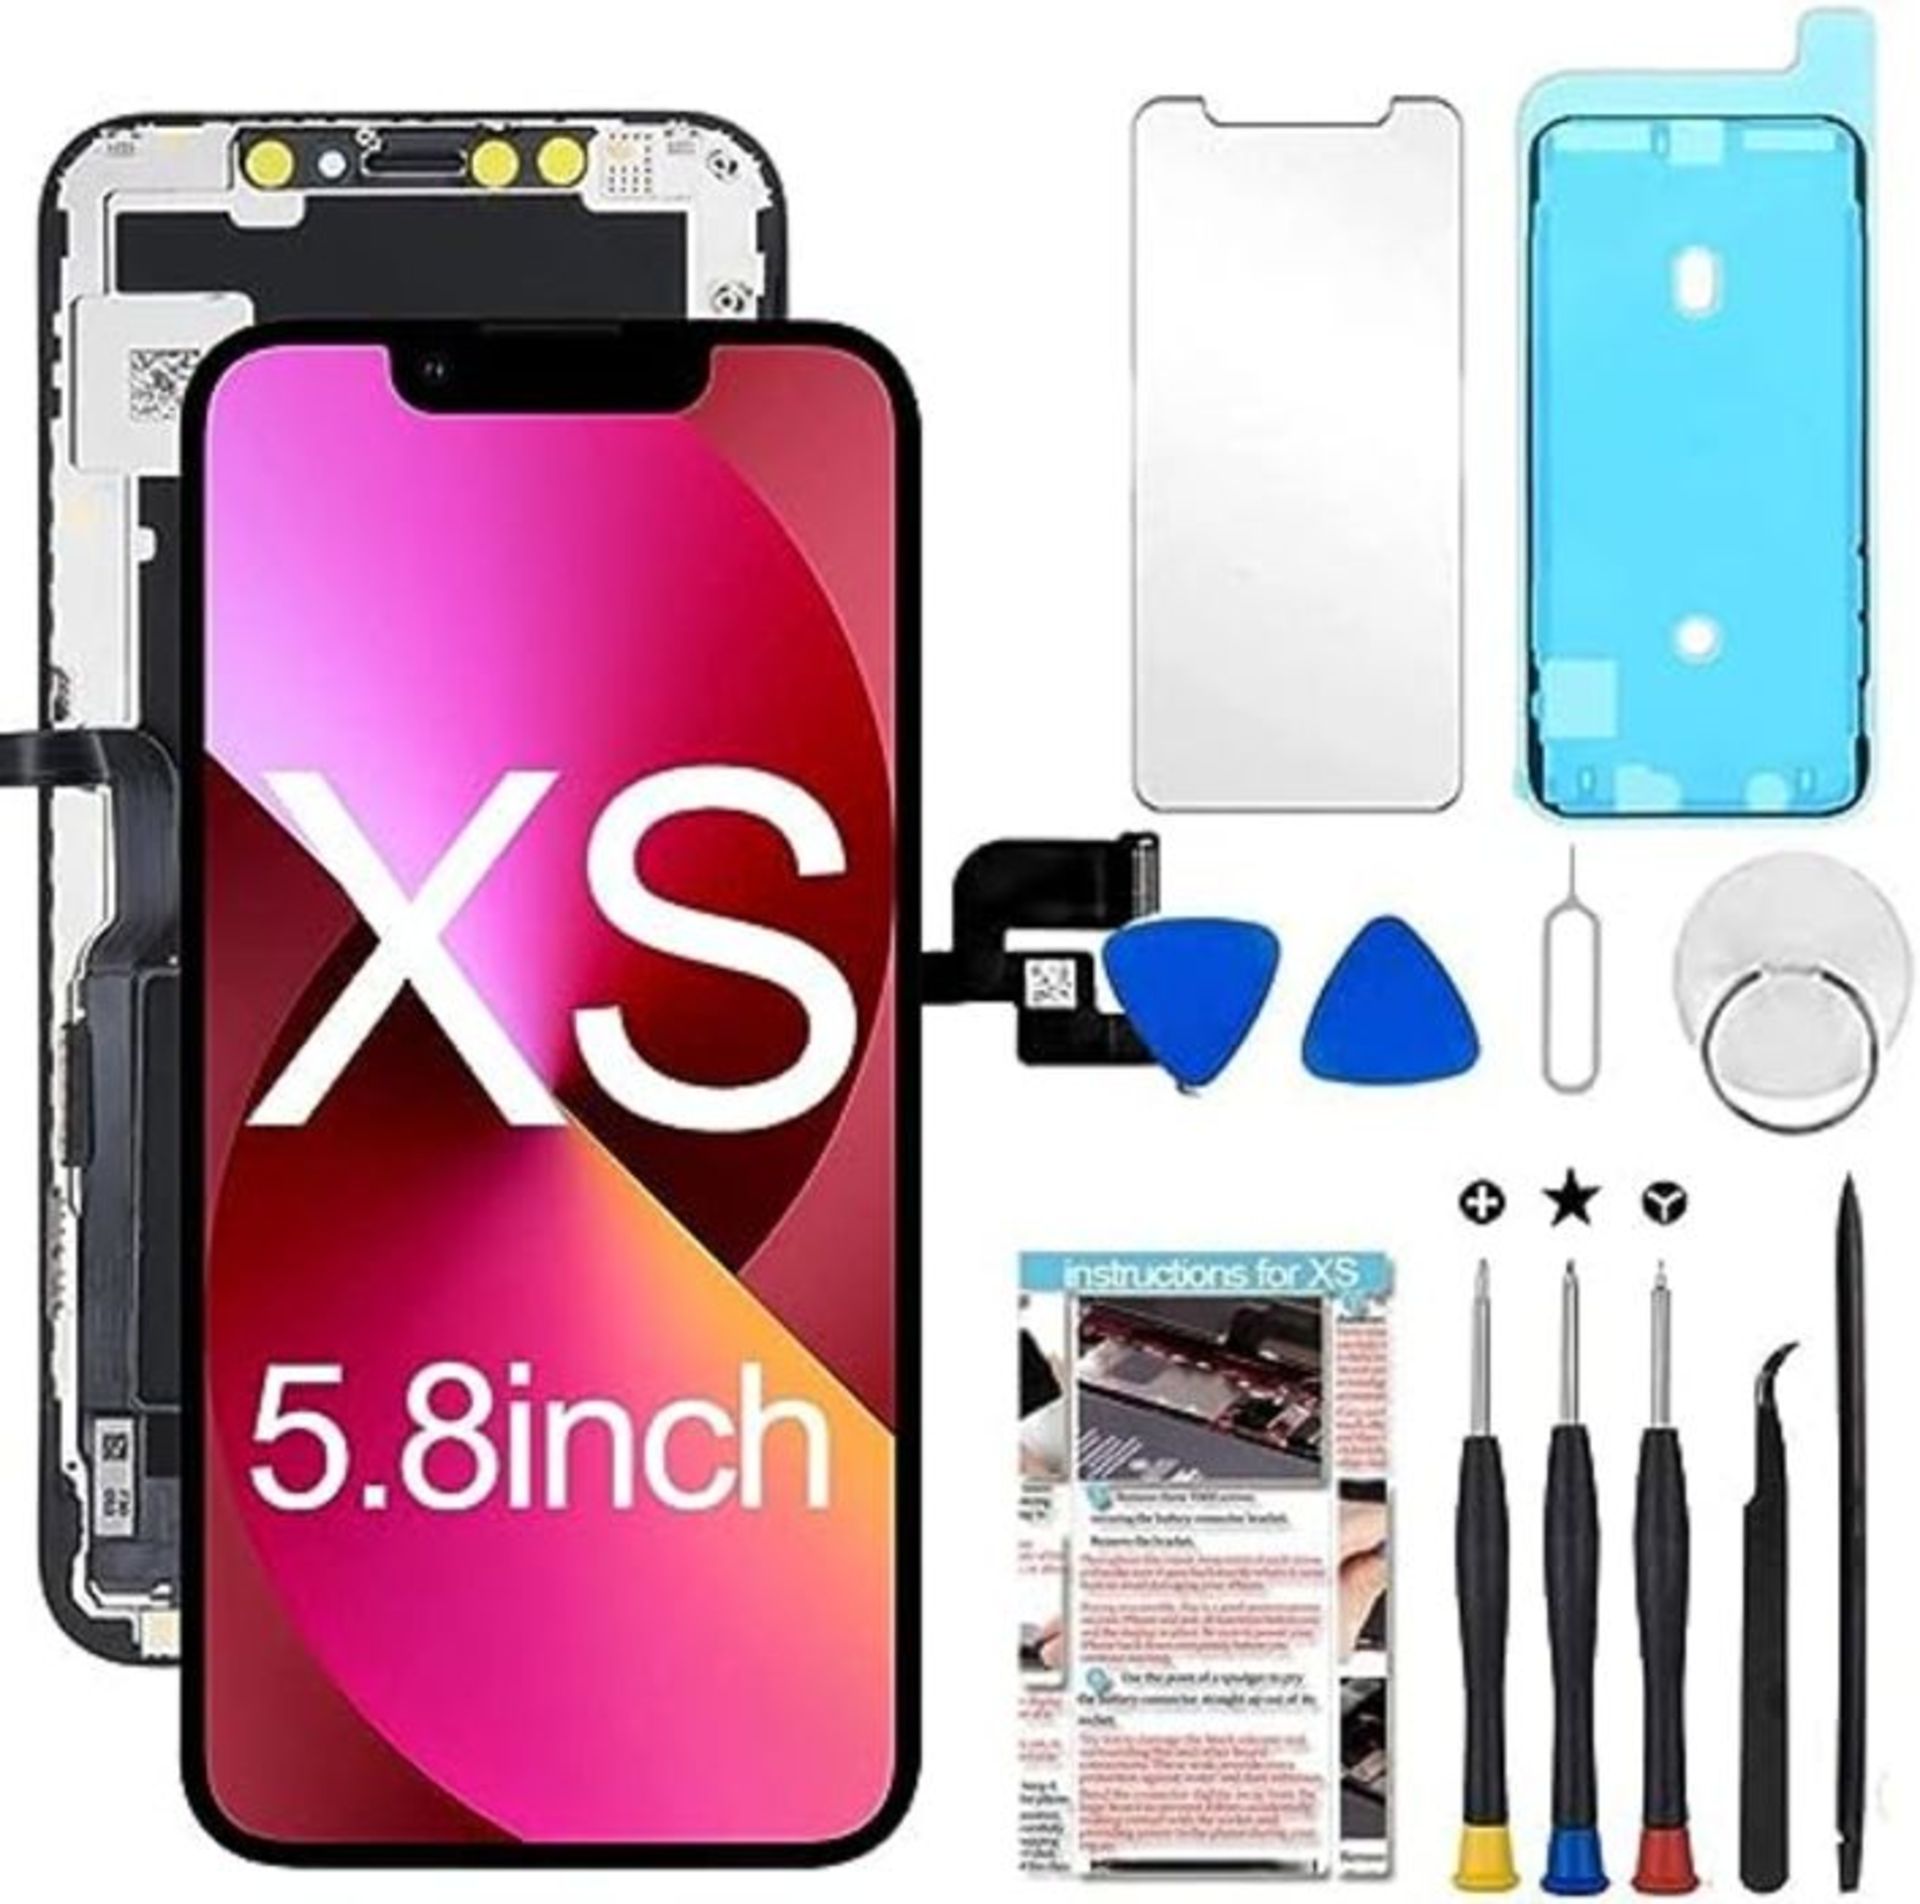 Fixerman for iPhone XS Screen Replacement LCD 5.8 inch Touch Screen Display Digitizer - Image 4 of 6